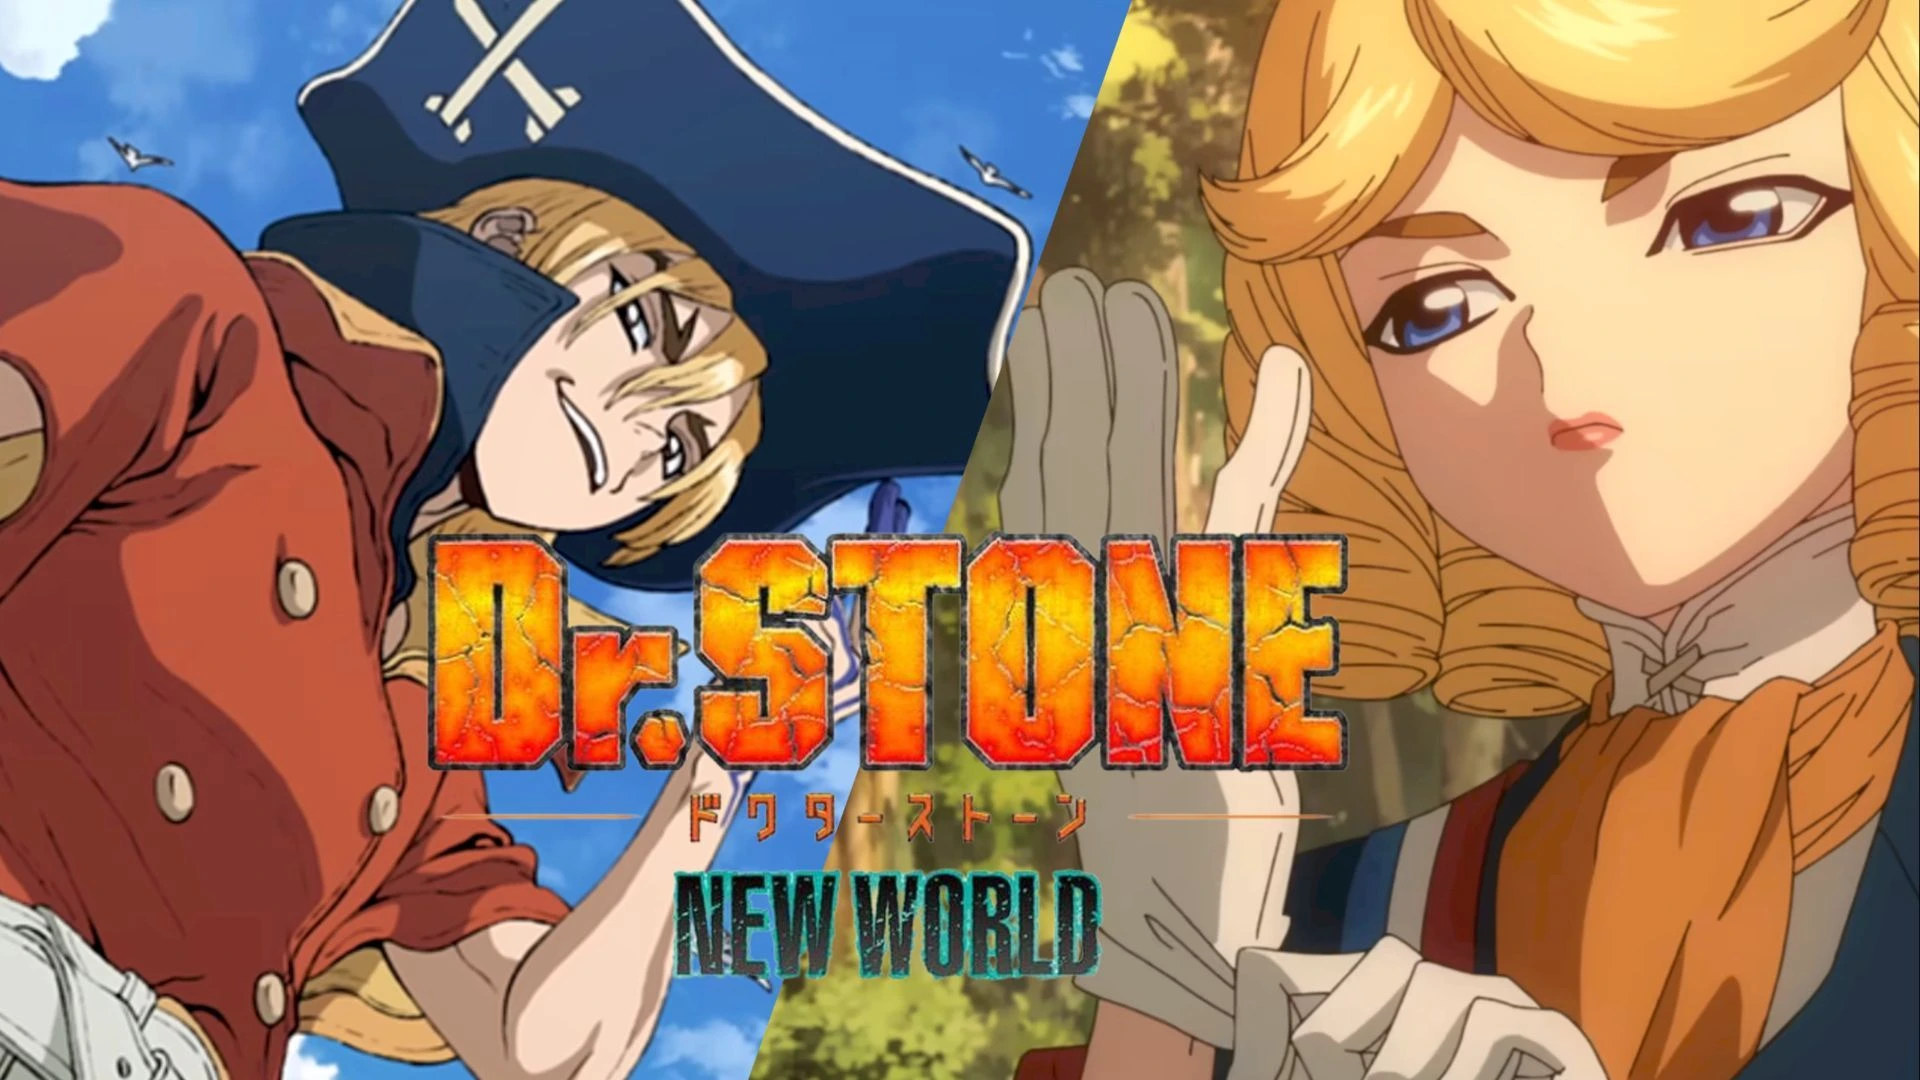 Dr. Stone Season 3 English Dub Release Date Update, Cast, Preview, Watch Online, and More